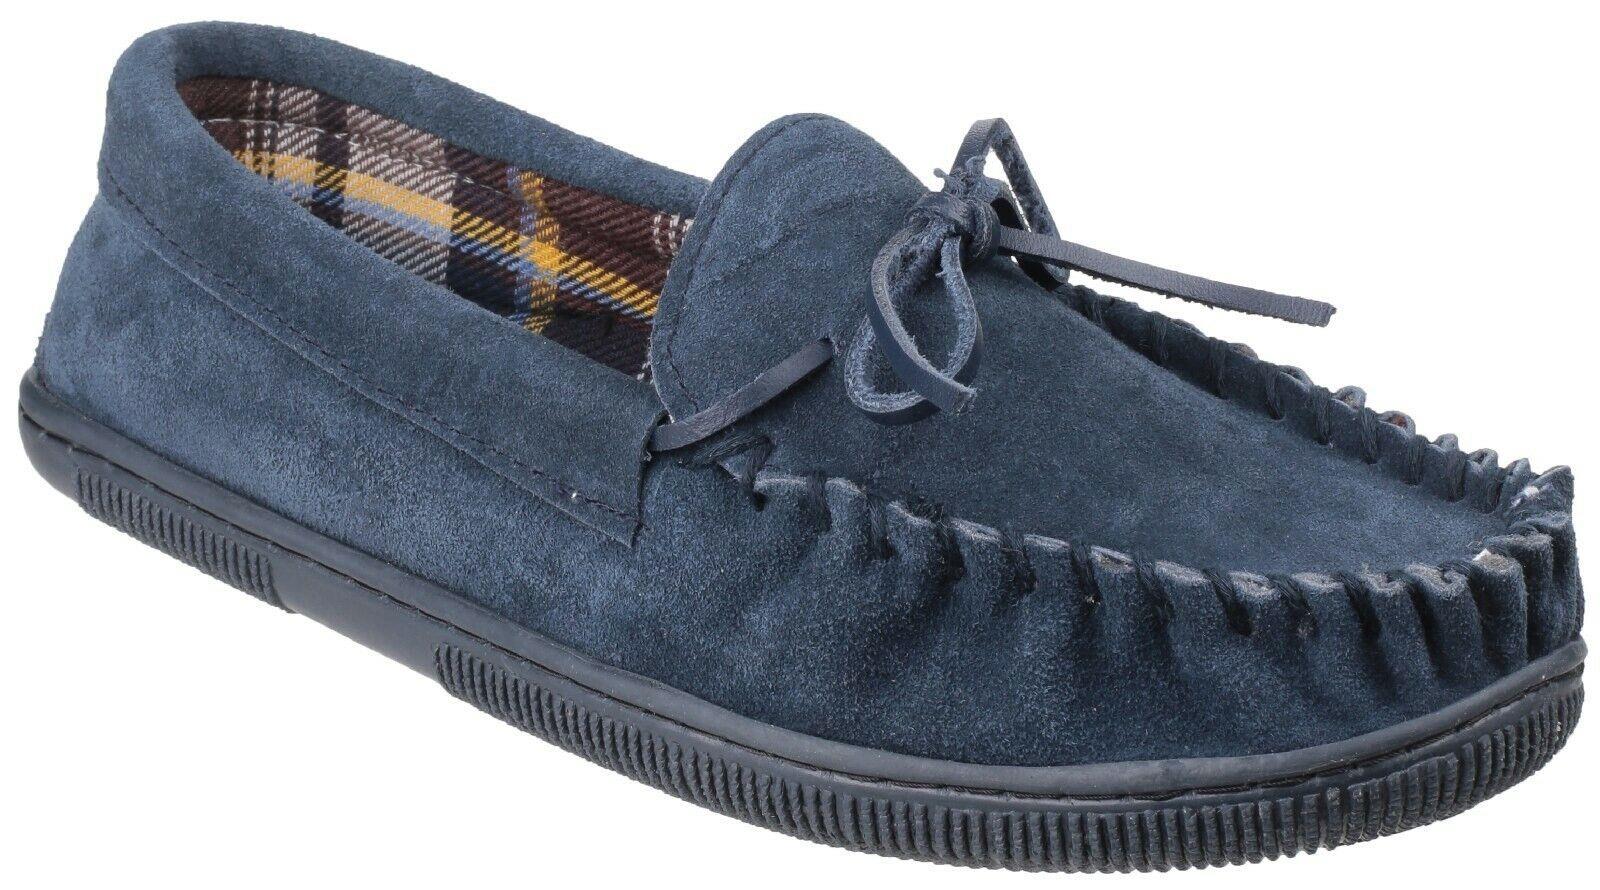 Cotswold Alberta navy blue suede textile lined slip-on moccasin slipper